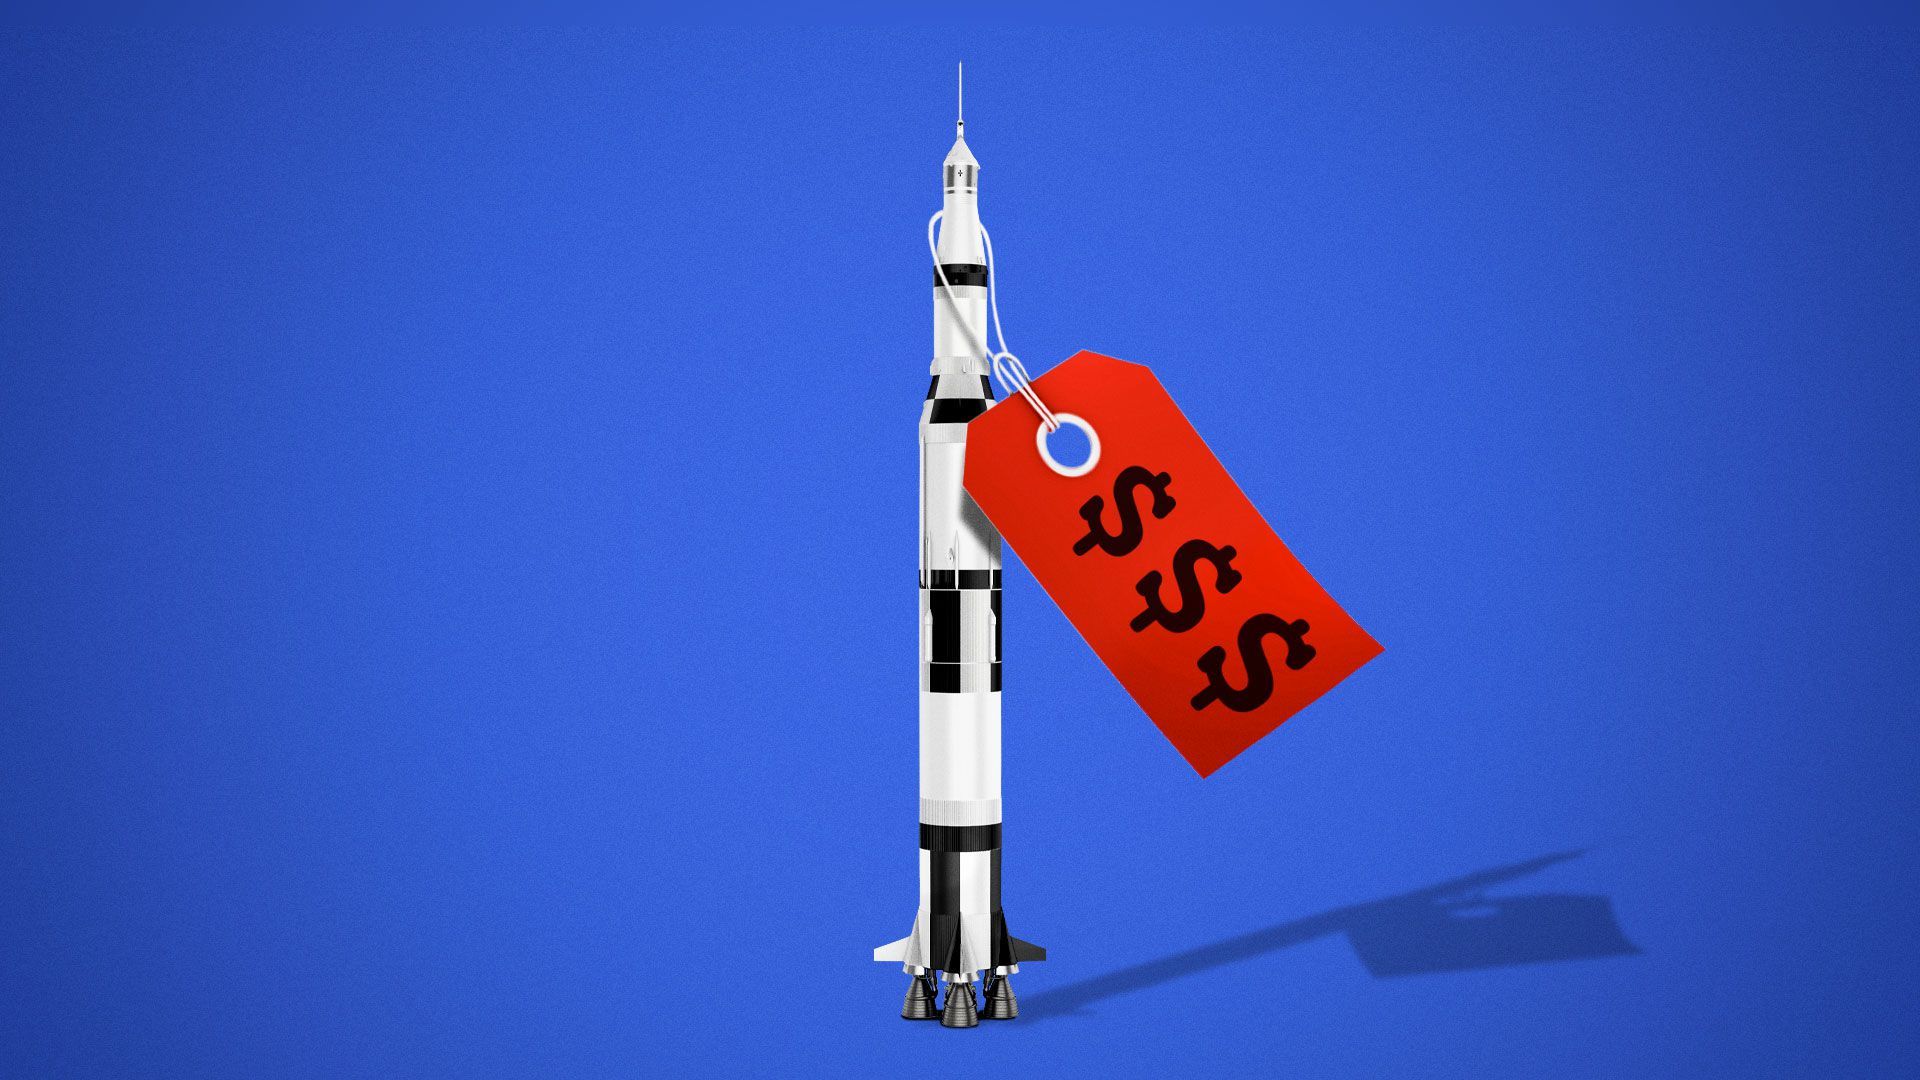 Illustration of rocket with giant price tag.